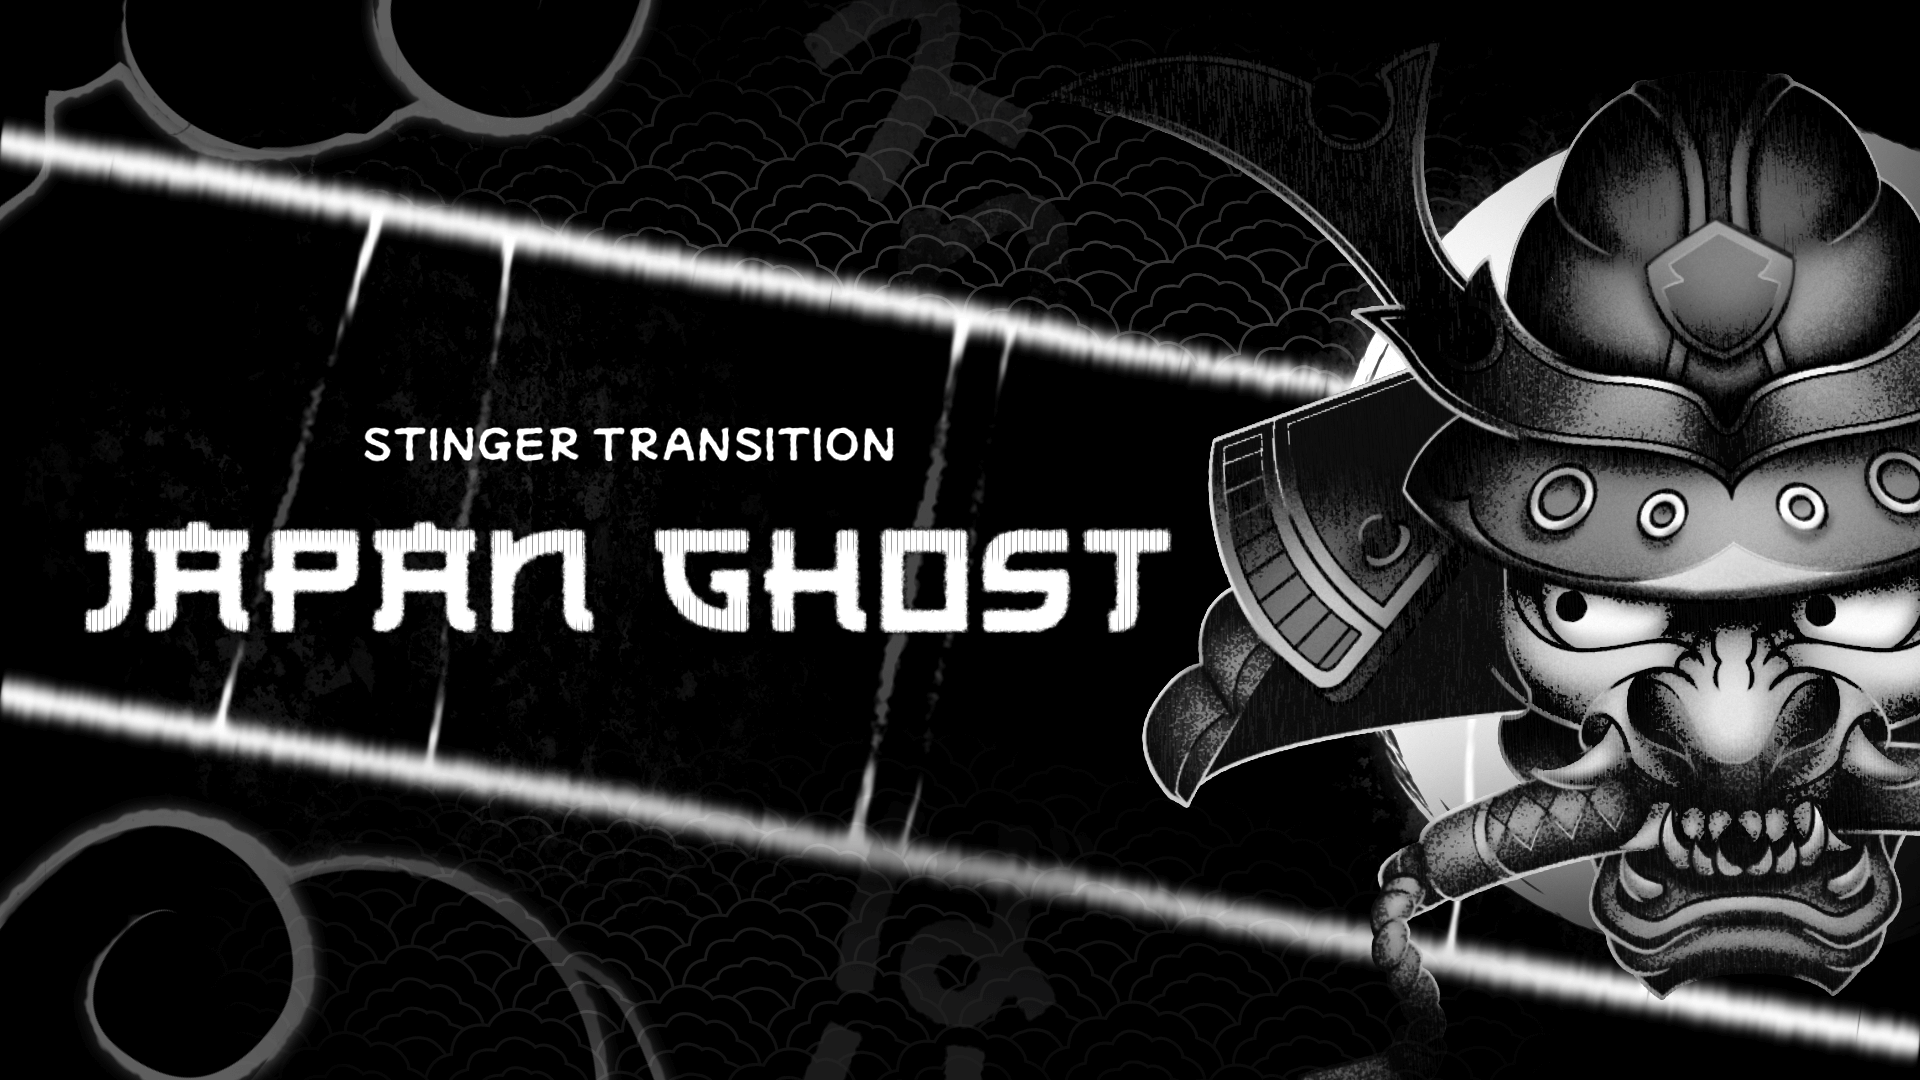 Japan Ghost - Stinger Transition for Twitch, Youtube and Facebook